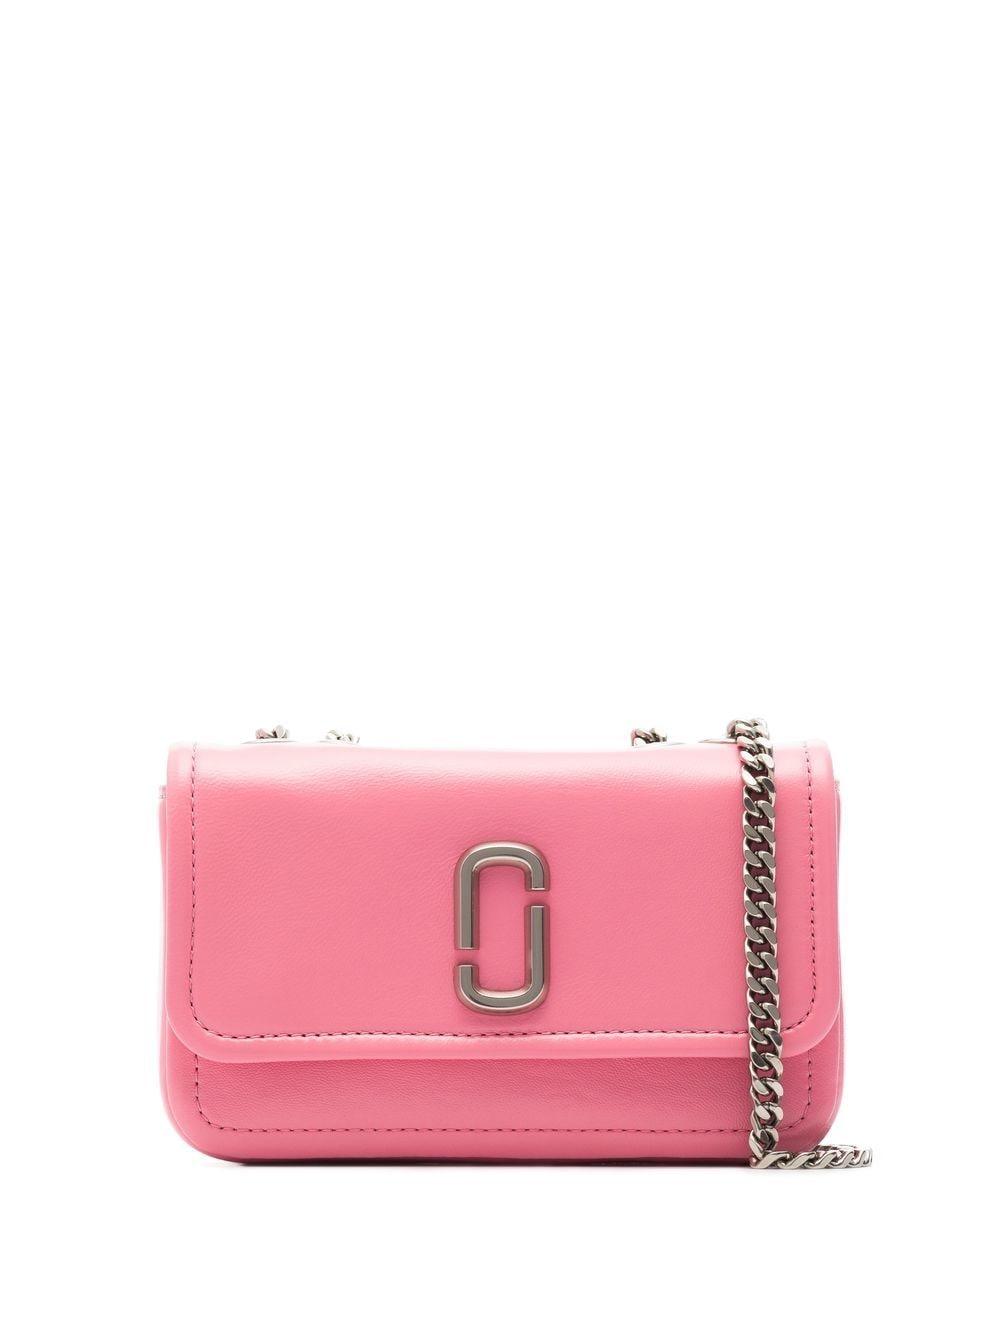 Marc Jacobs Leather The Glam Shot Mini Bag in Pink | Lyst Canada